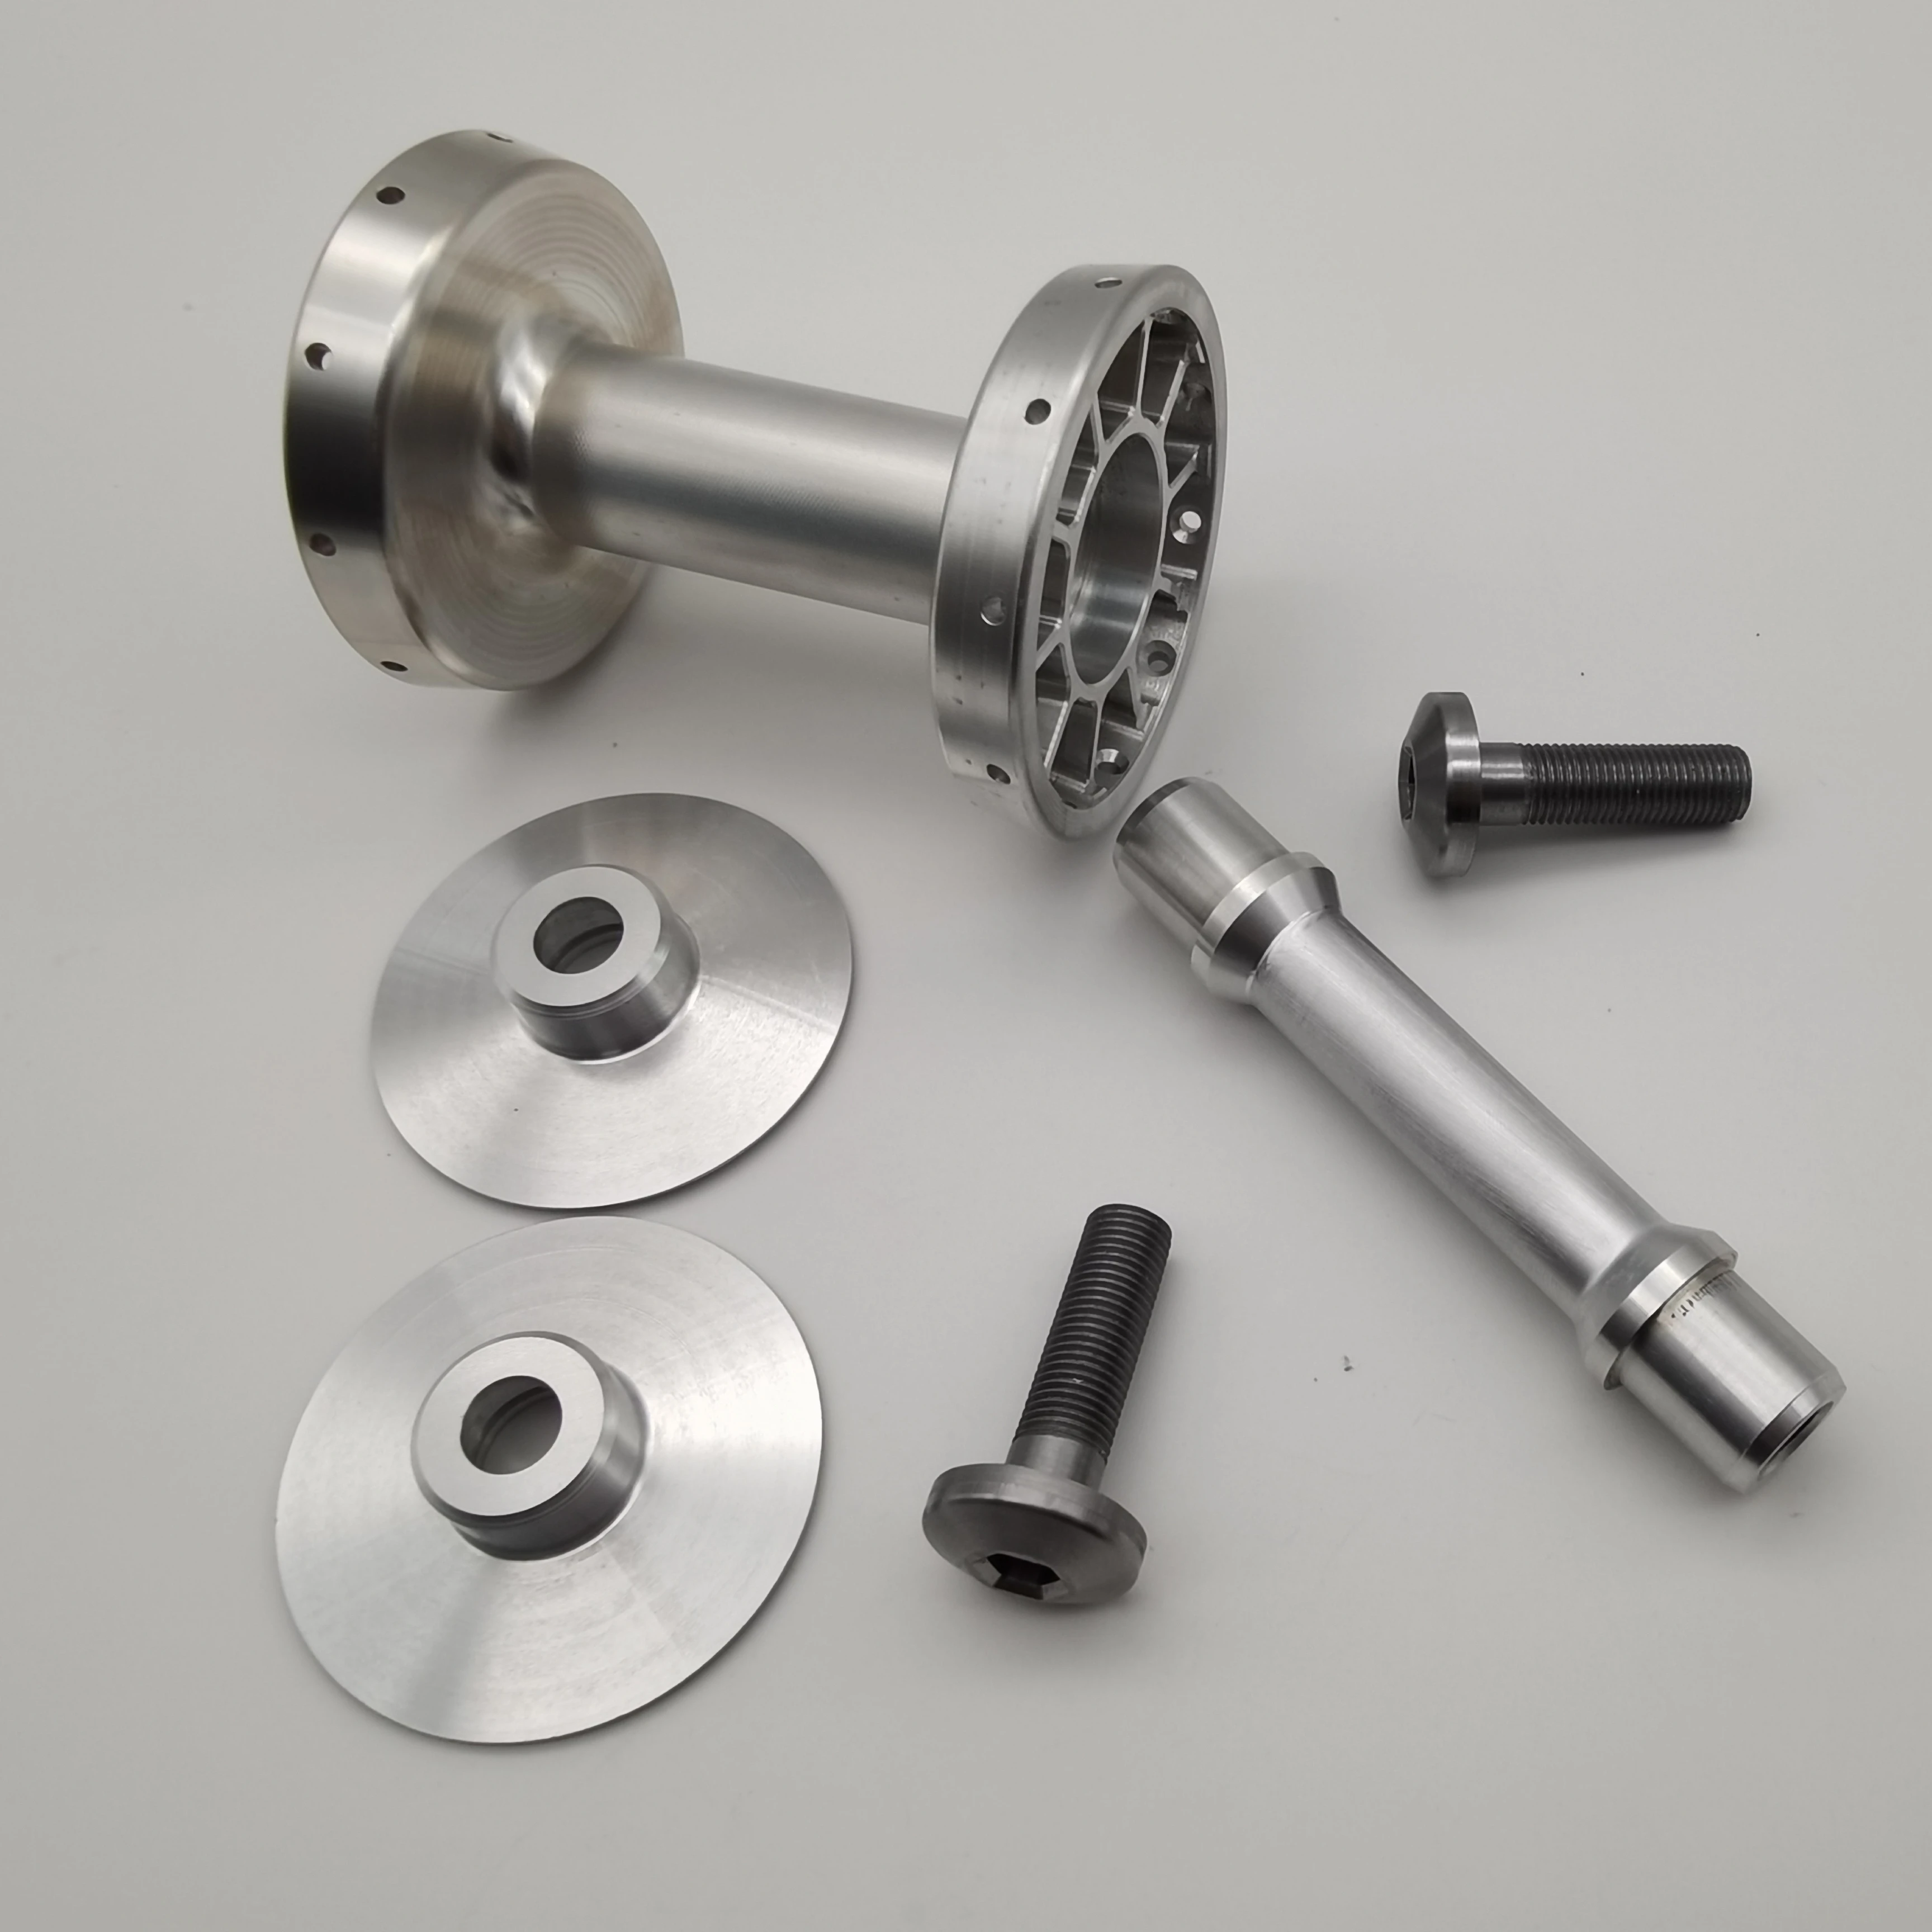 Cnc Machined Aluminum 6061 Motorcycle Spare PartsAnodized Aluminum Case Cnc Machining Aluminum parts